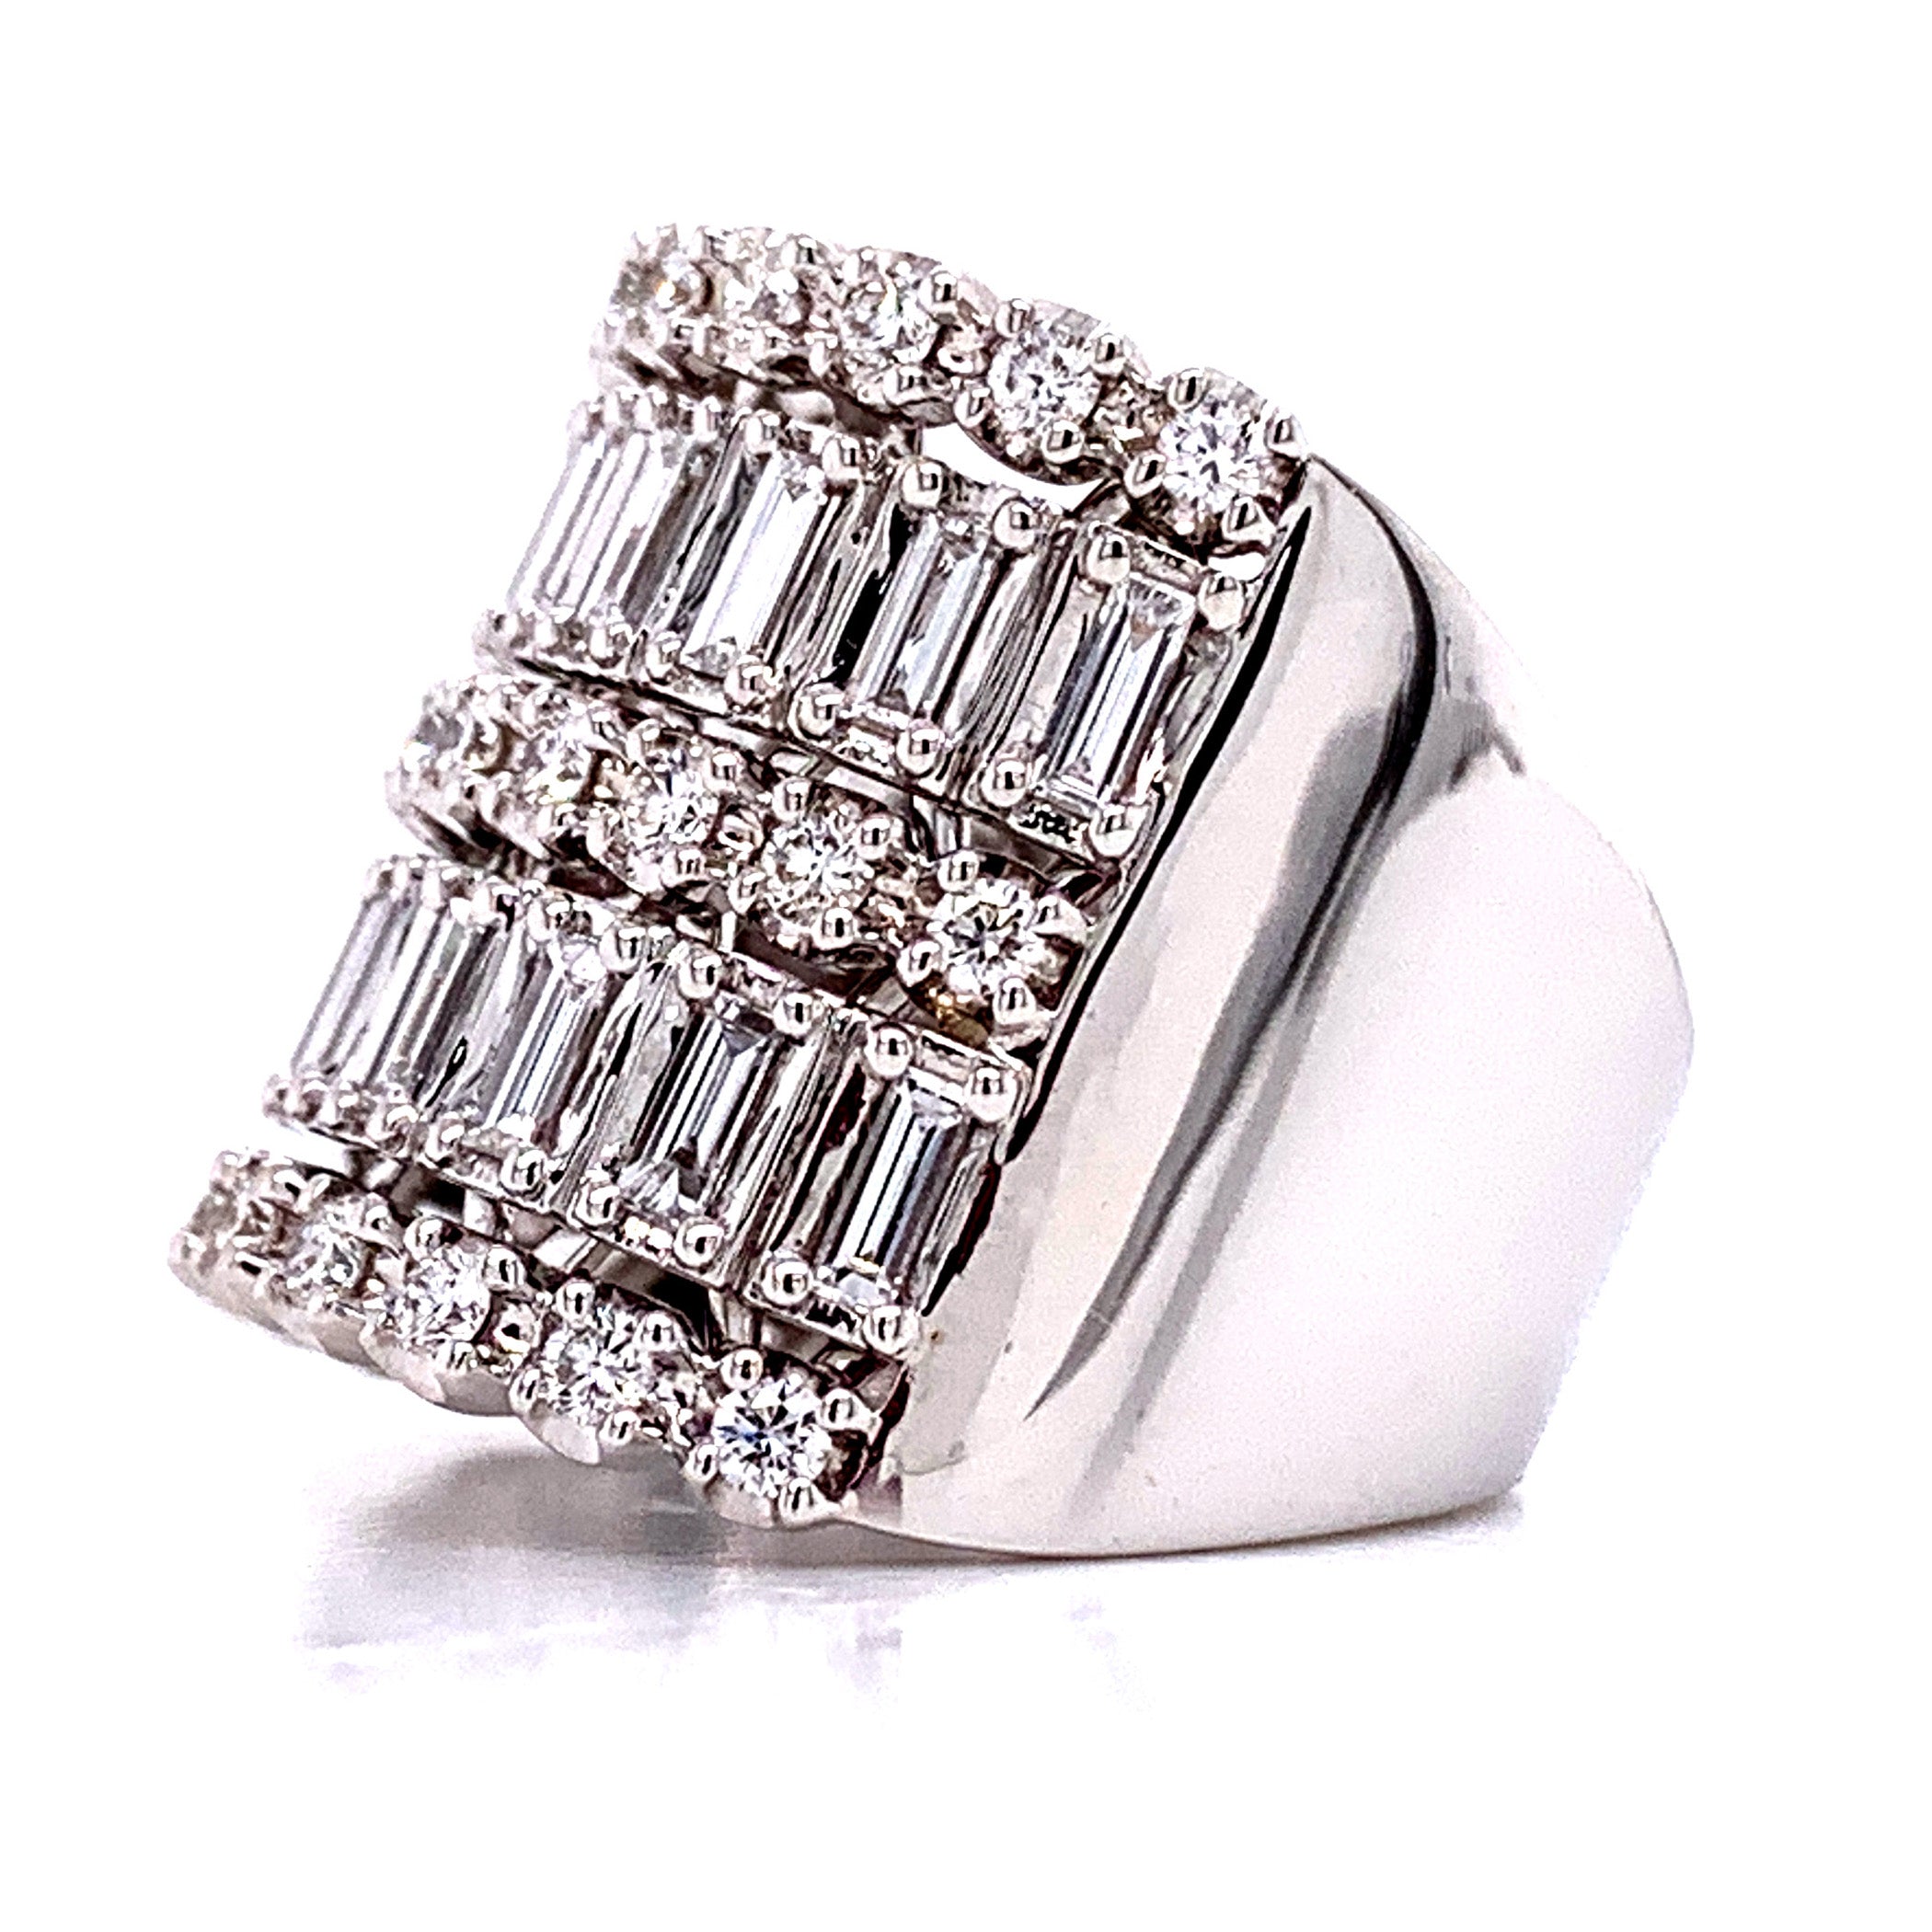 Diamond Baguette-cut Two Row and Three row Round Brilliant-cut Statement Ring 1.61ct t.w. - HANIKEN JEWELERS NEW-YORK